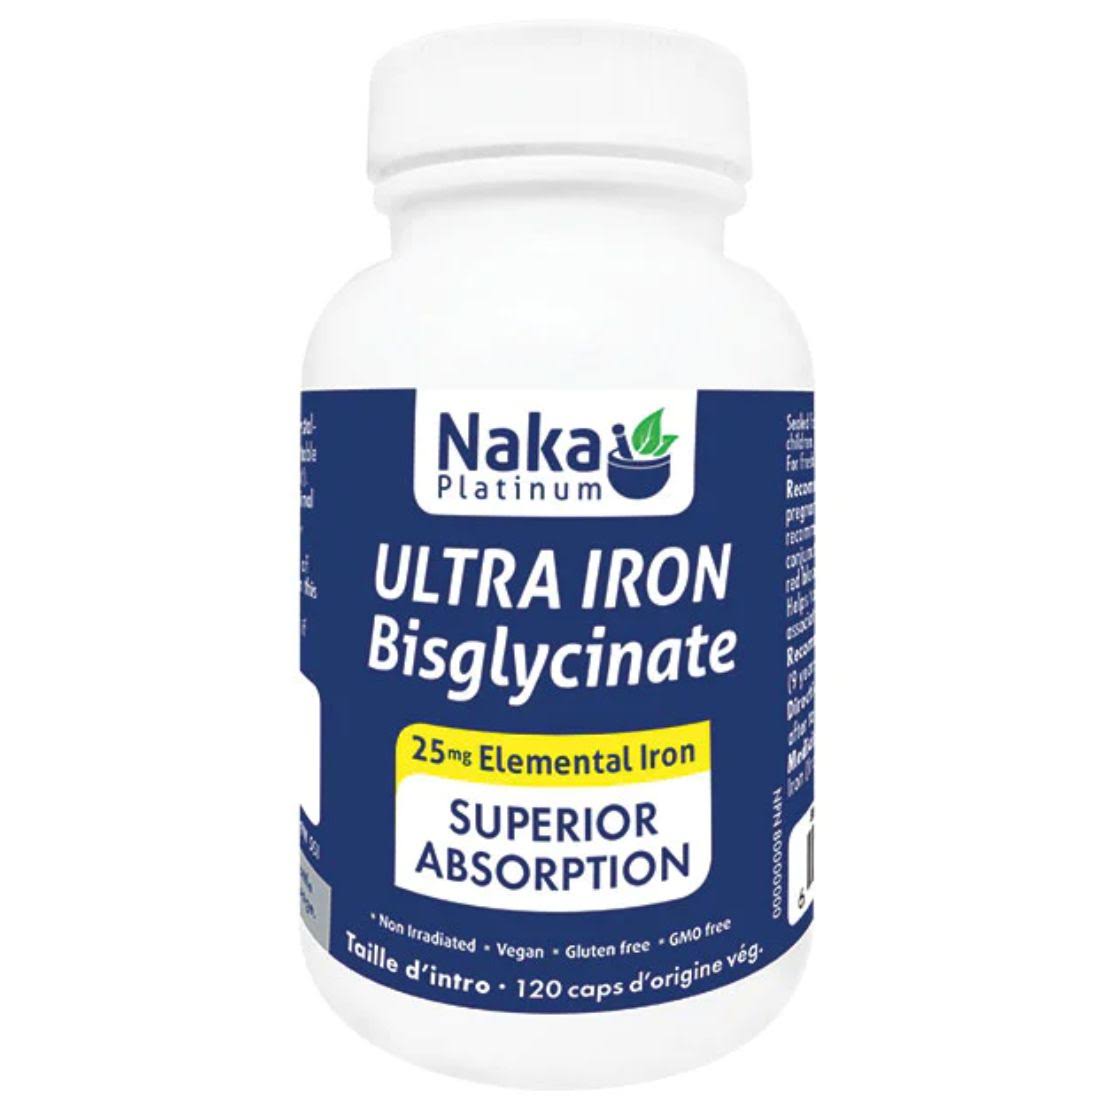 Ultra Iron Bisglycinate 25mg Elemental Iron – 120 Vcaps